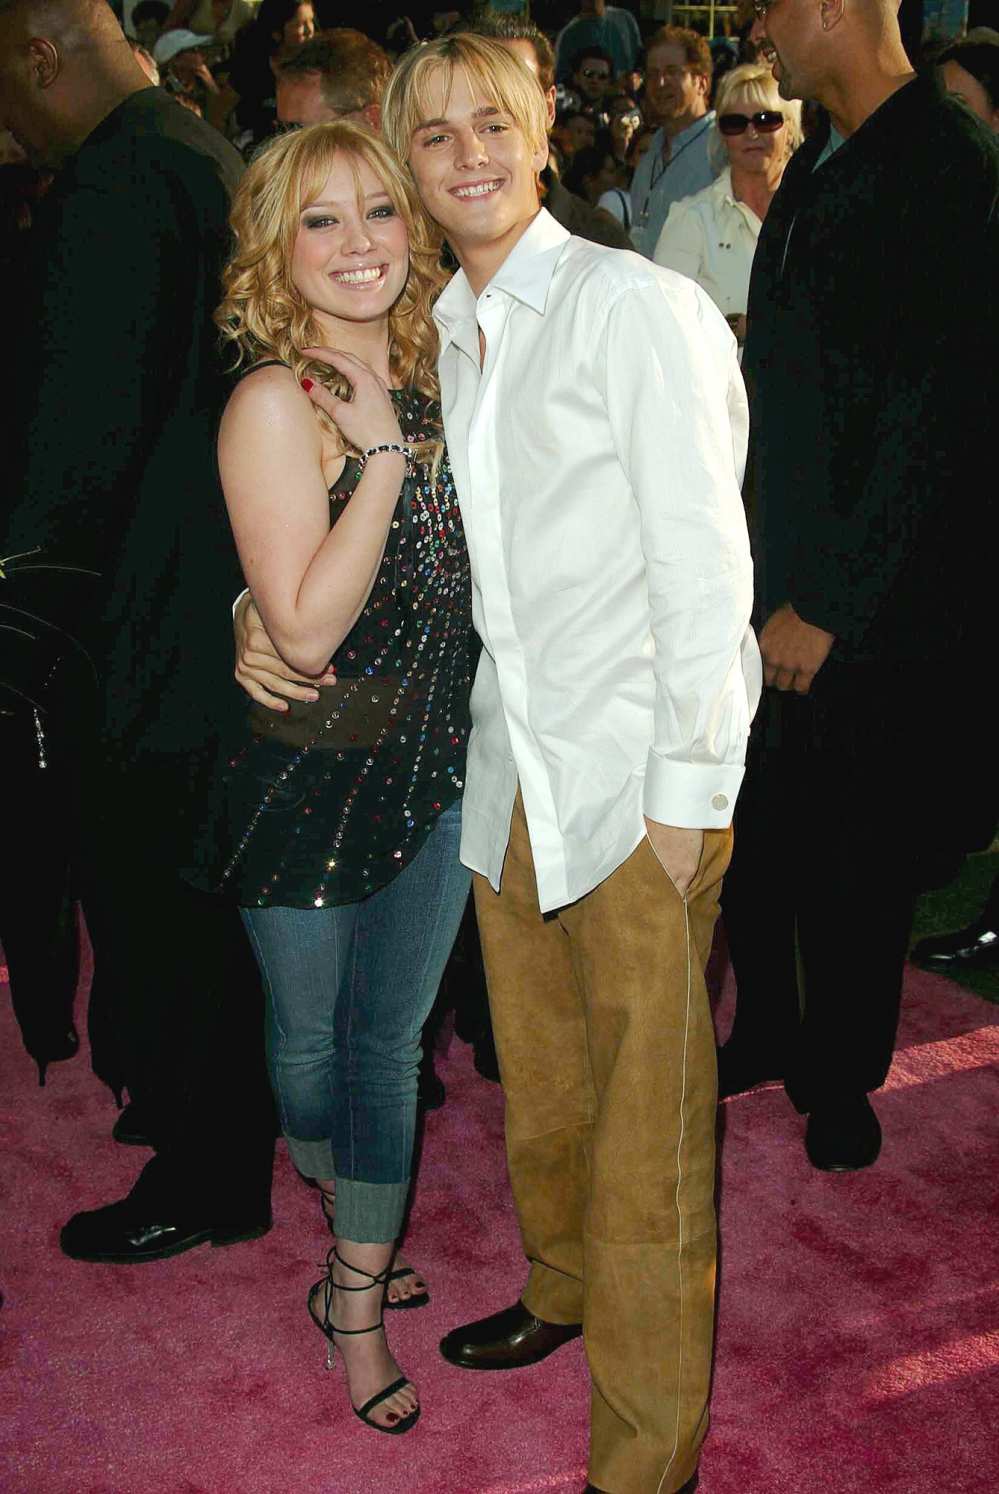 Hilary Duff Aaron Carter 233 'THE LIZZY MCGUIRE MOVIE' FILM PREMIERE, LOS ANGELES, AMERICA - 26 APR 2003